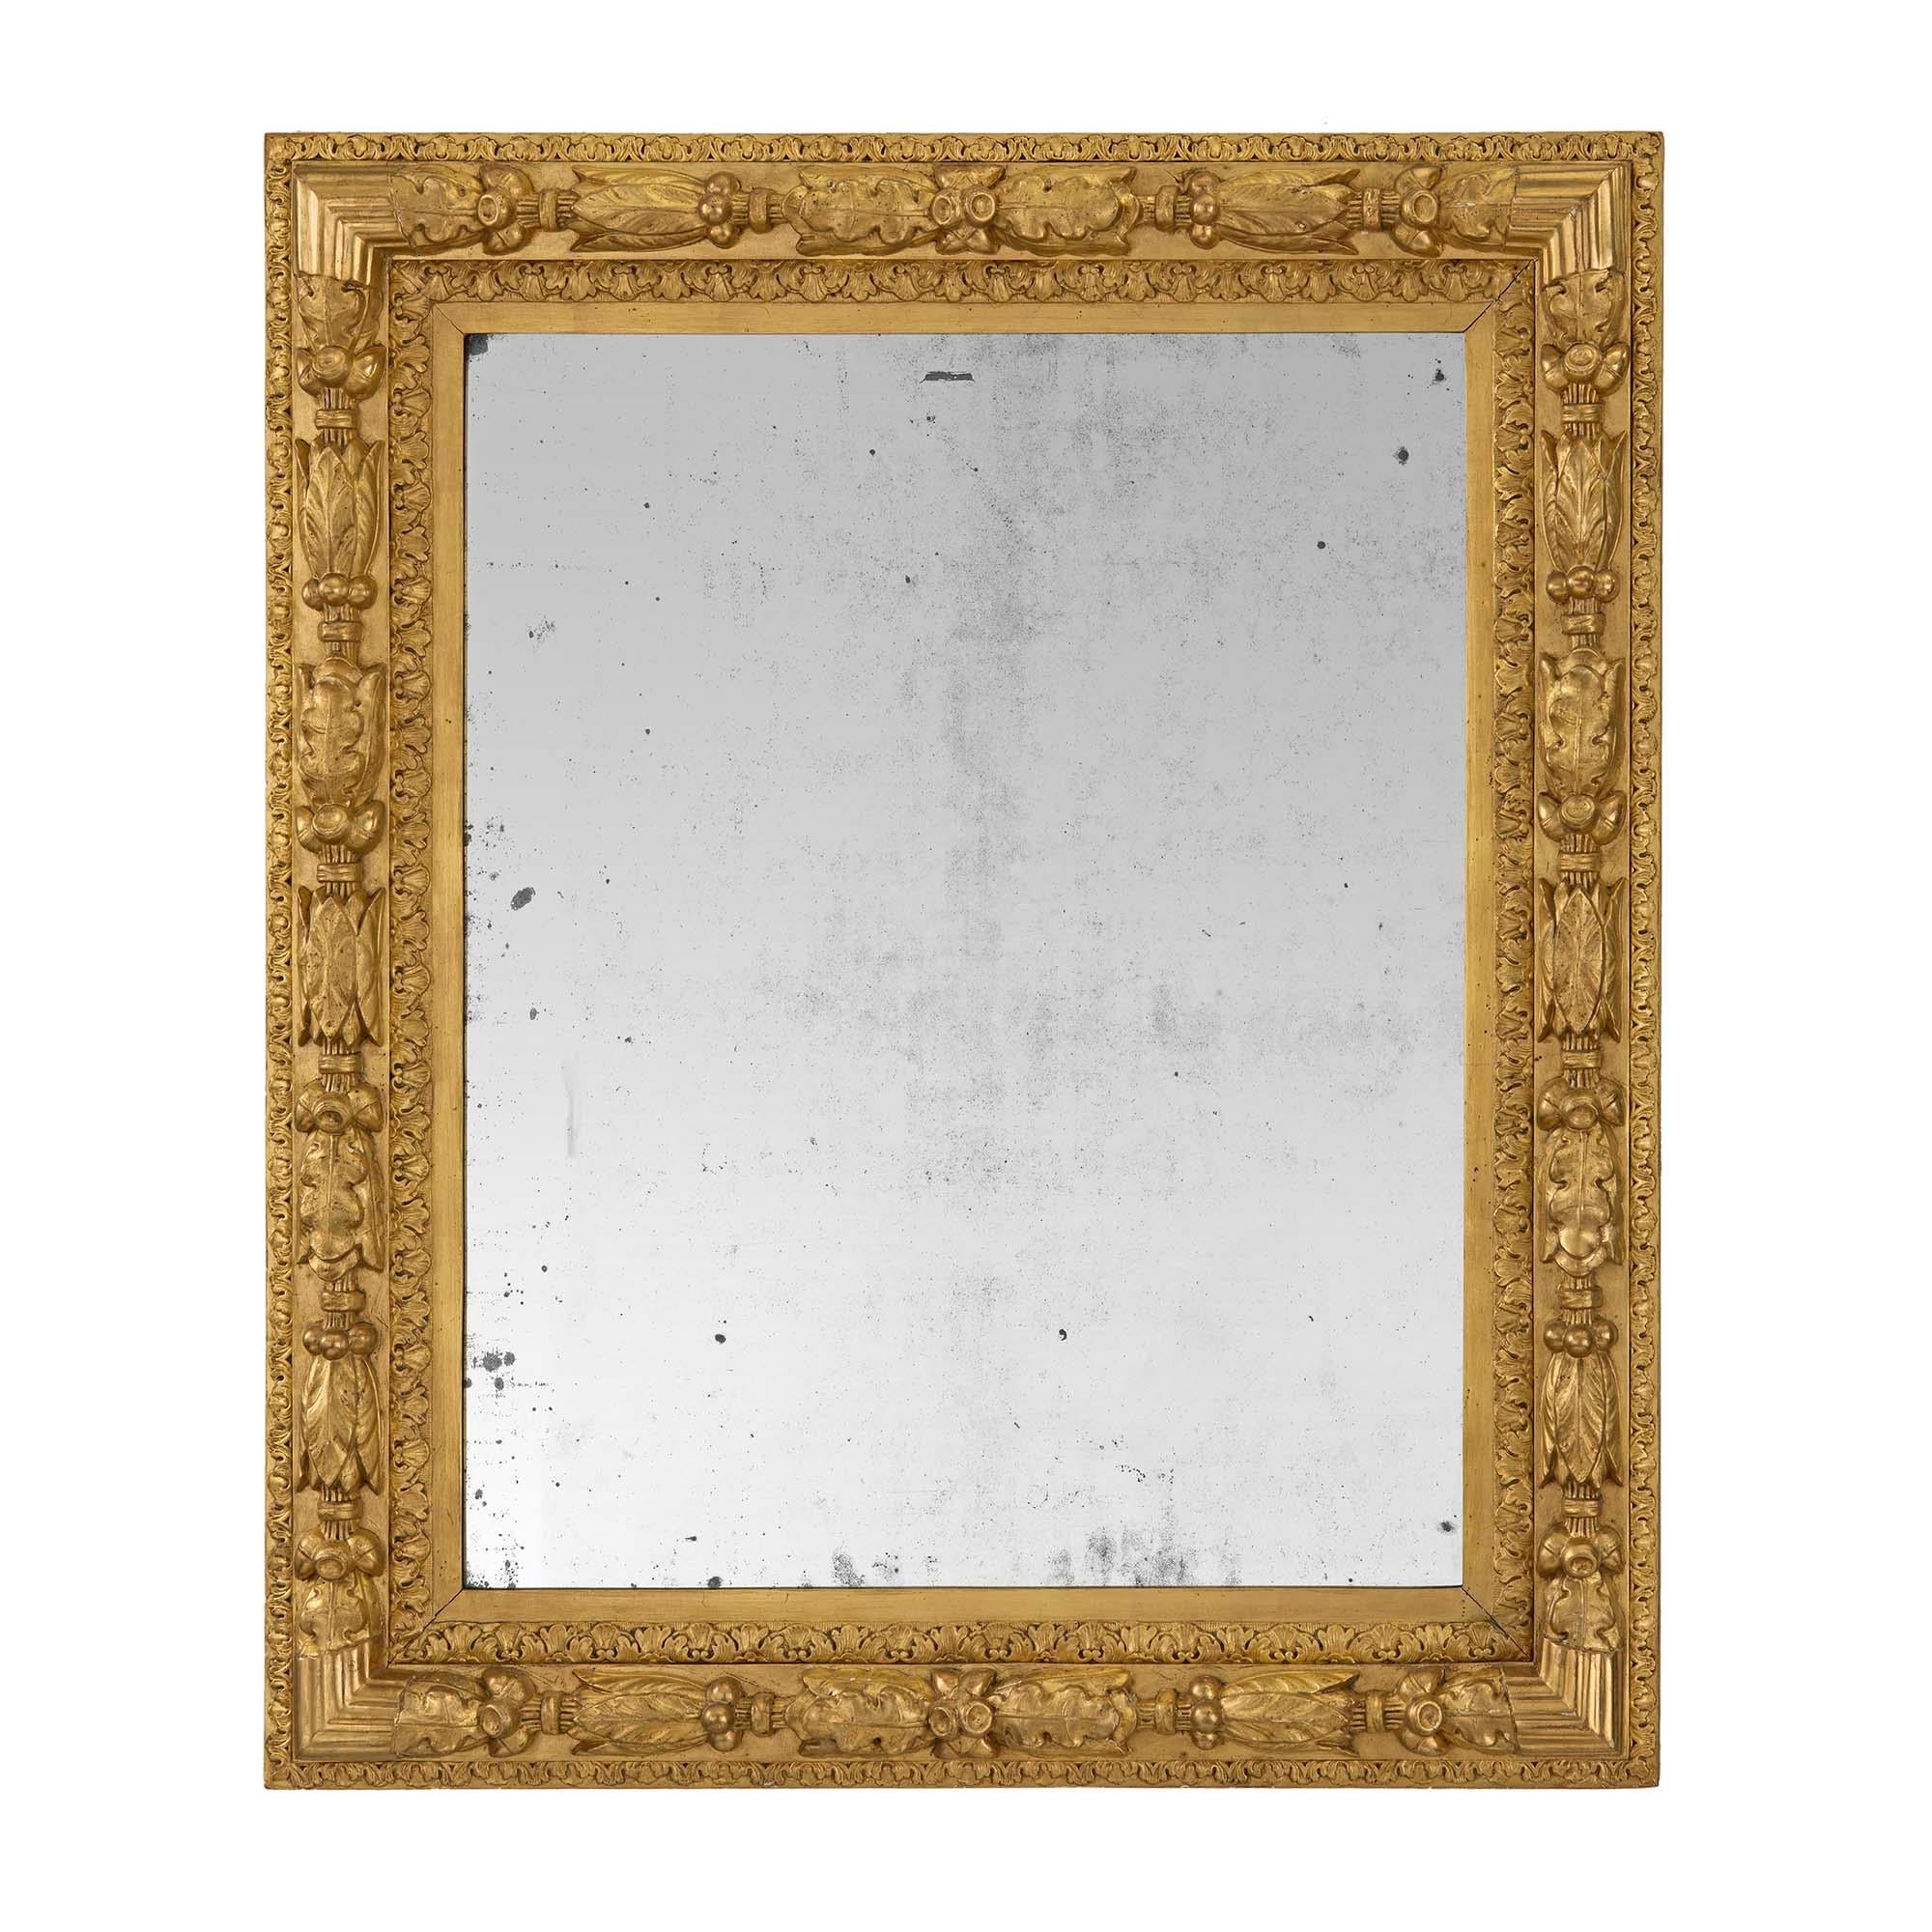 A striking pair of French 19th century Louis XVI st. giltwood mirrors. Each mirror retains their original mirror plate framed within beautiful mottled giltwood borders. The frame displays a richly carved foliate band and mirrored oak leaves and